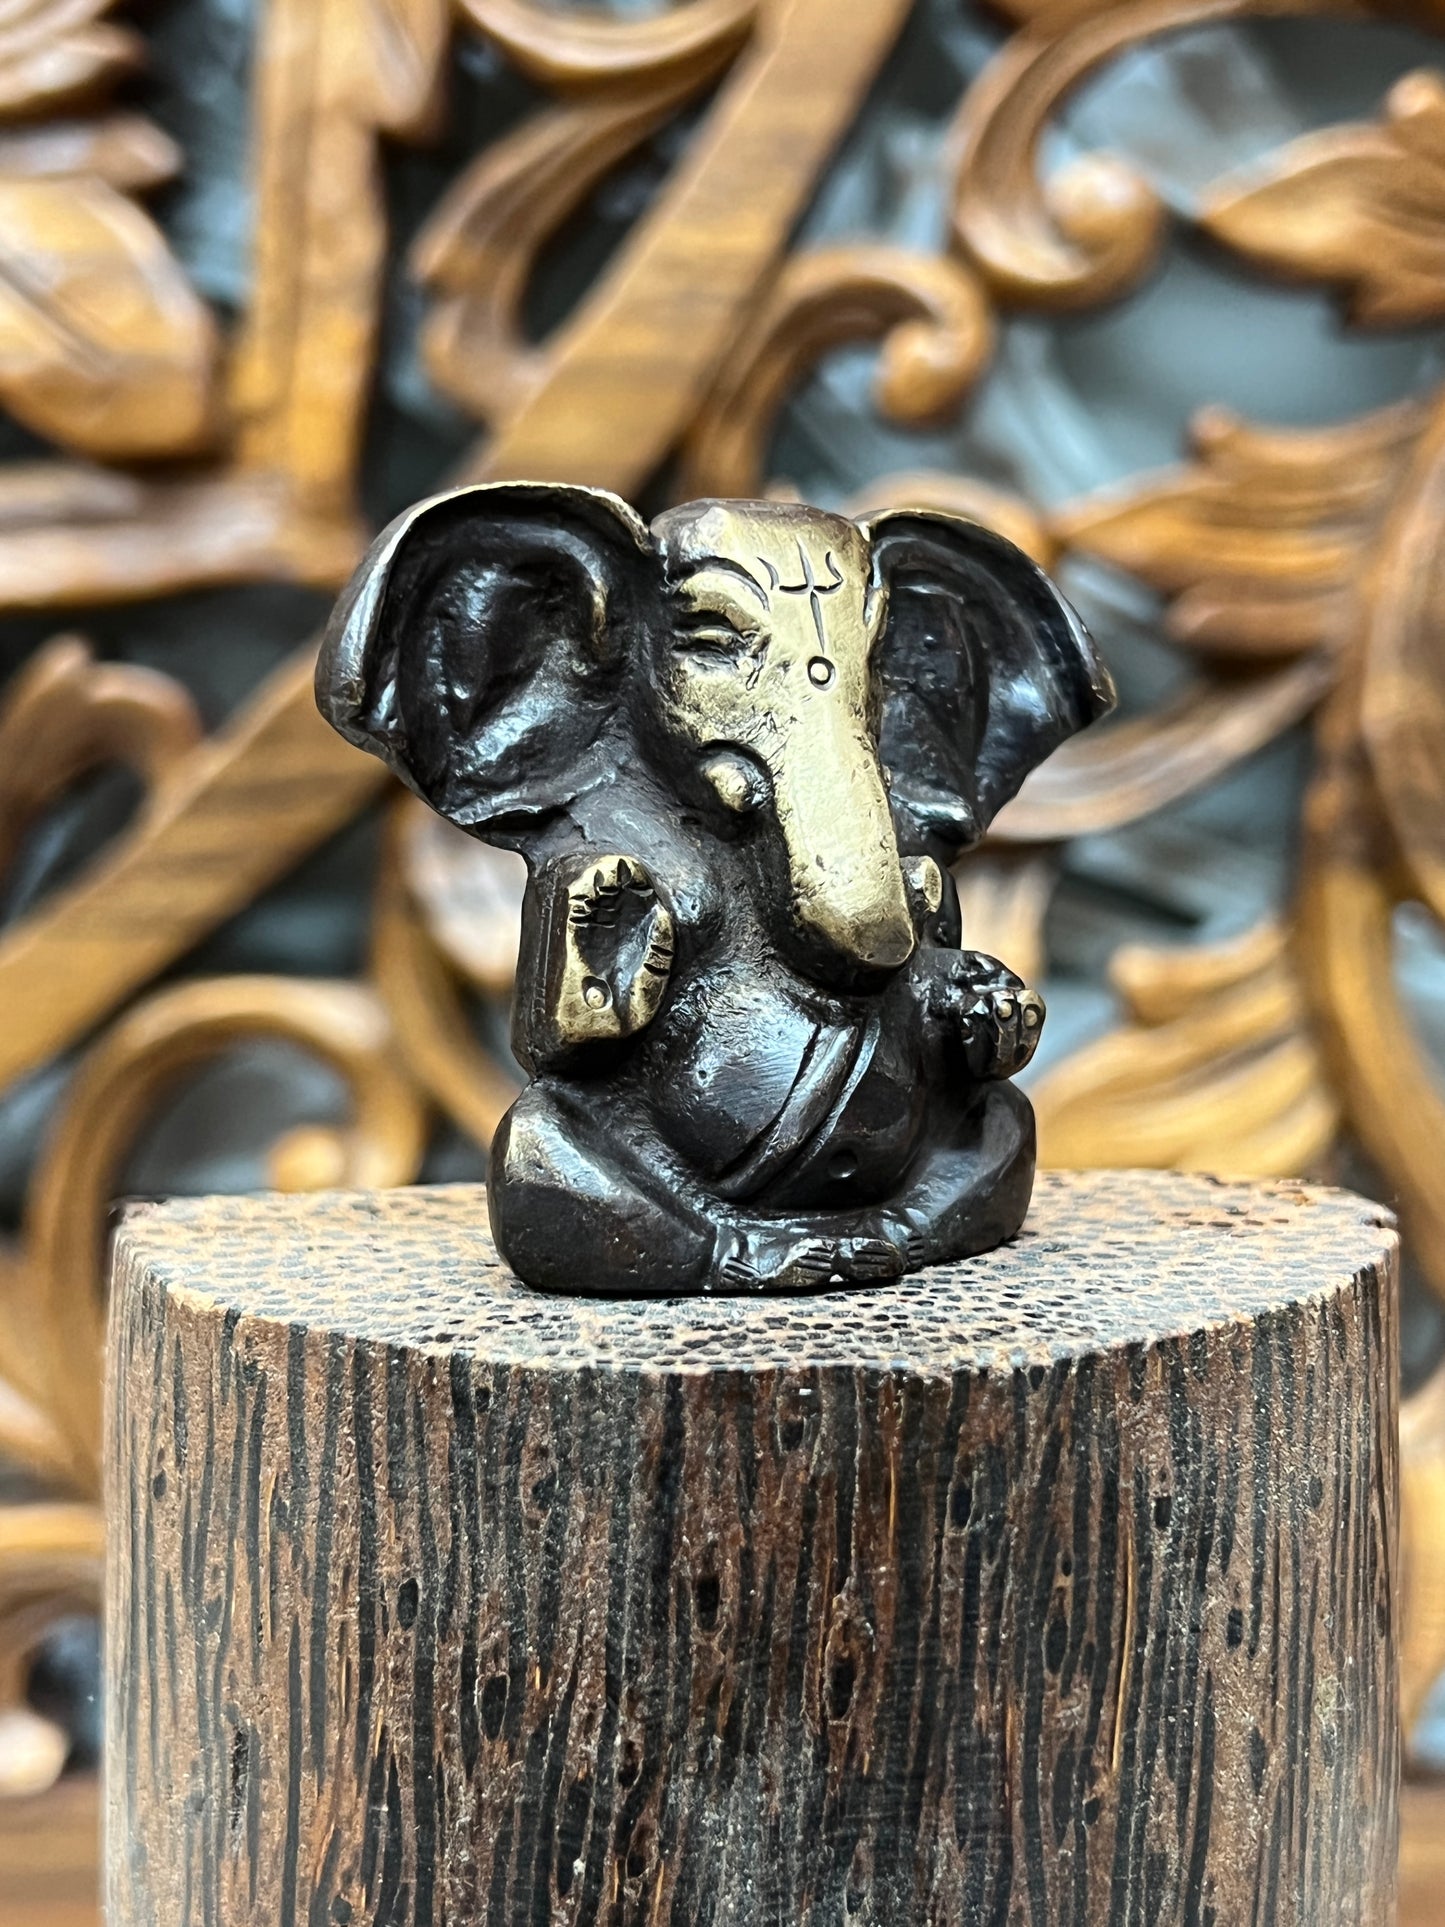 Hand Finished Brass Ganesh Statues - Remover of Obstacles 5cm x 4cm